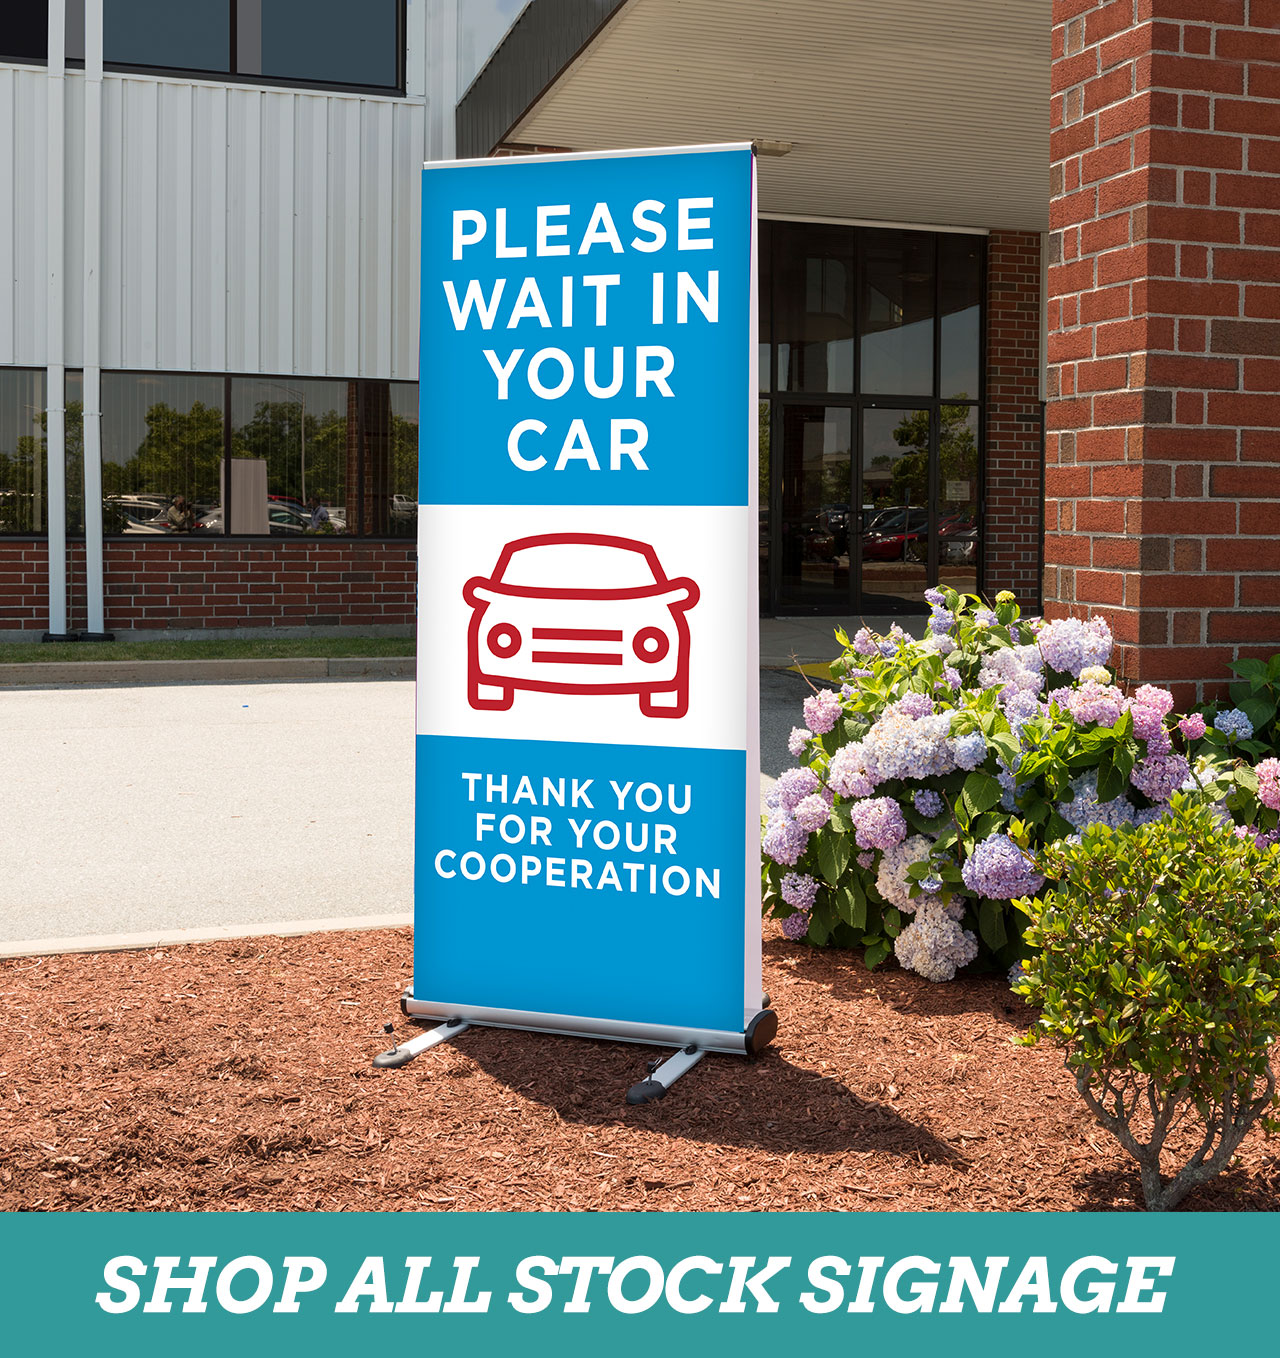 SHOP ALL STOCK SIGNAGE